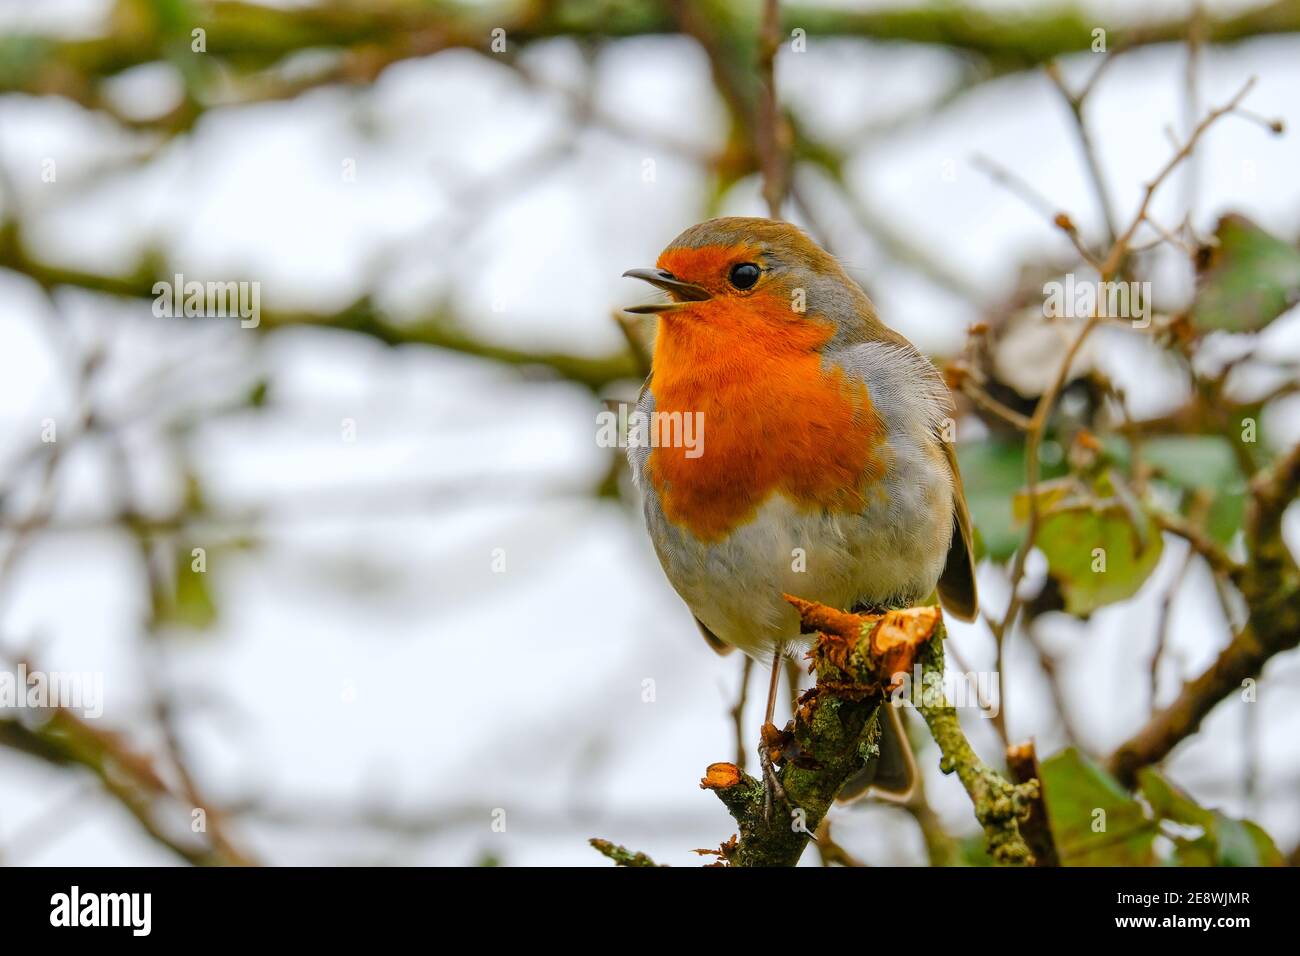 Red-breasted Robin on tree branch. Stock Photo